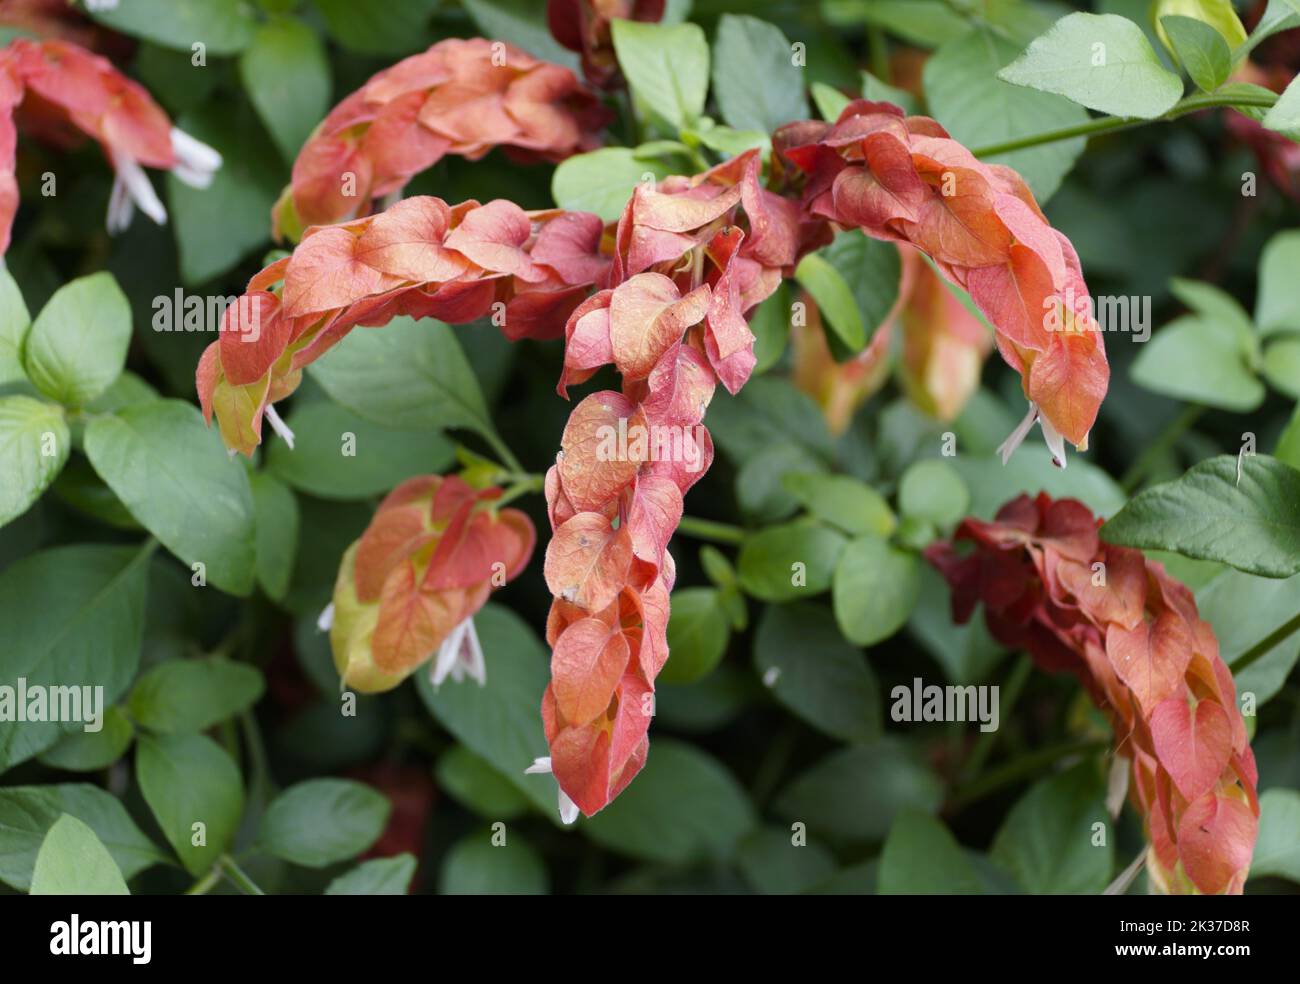 Unique shape and red flower of Shrimp plant with flowers that attracts hummingbirds Stock Photo